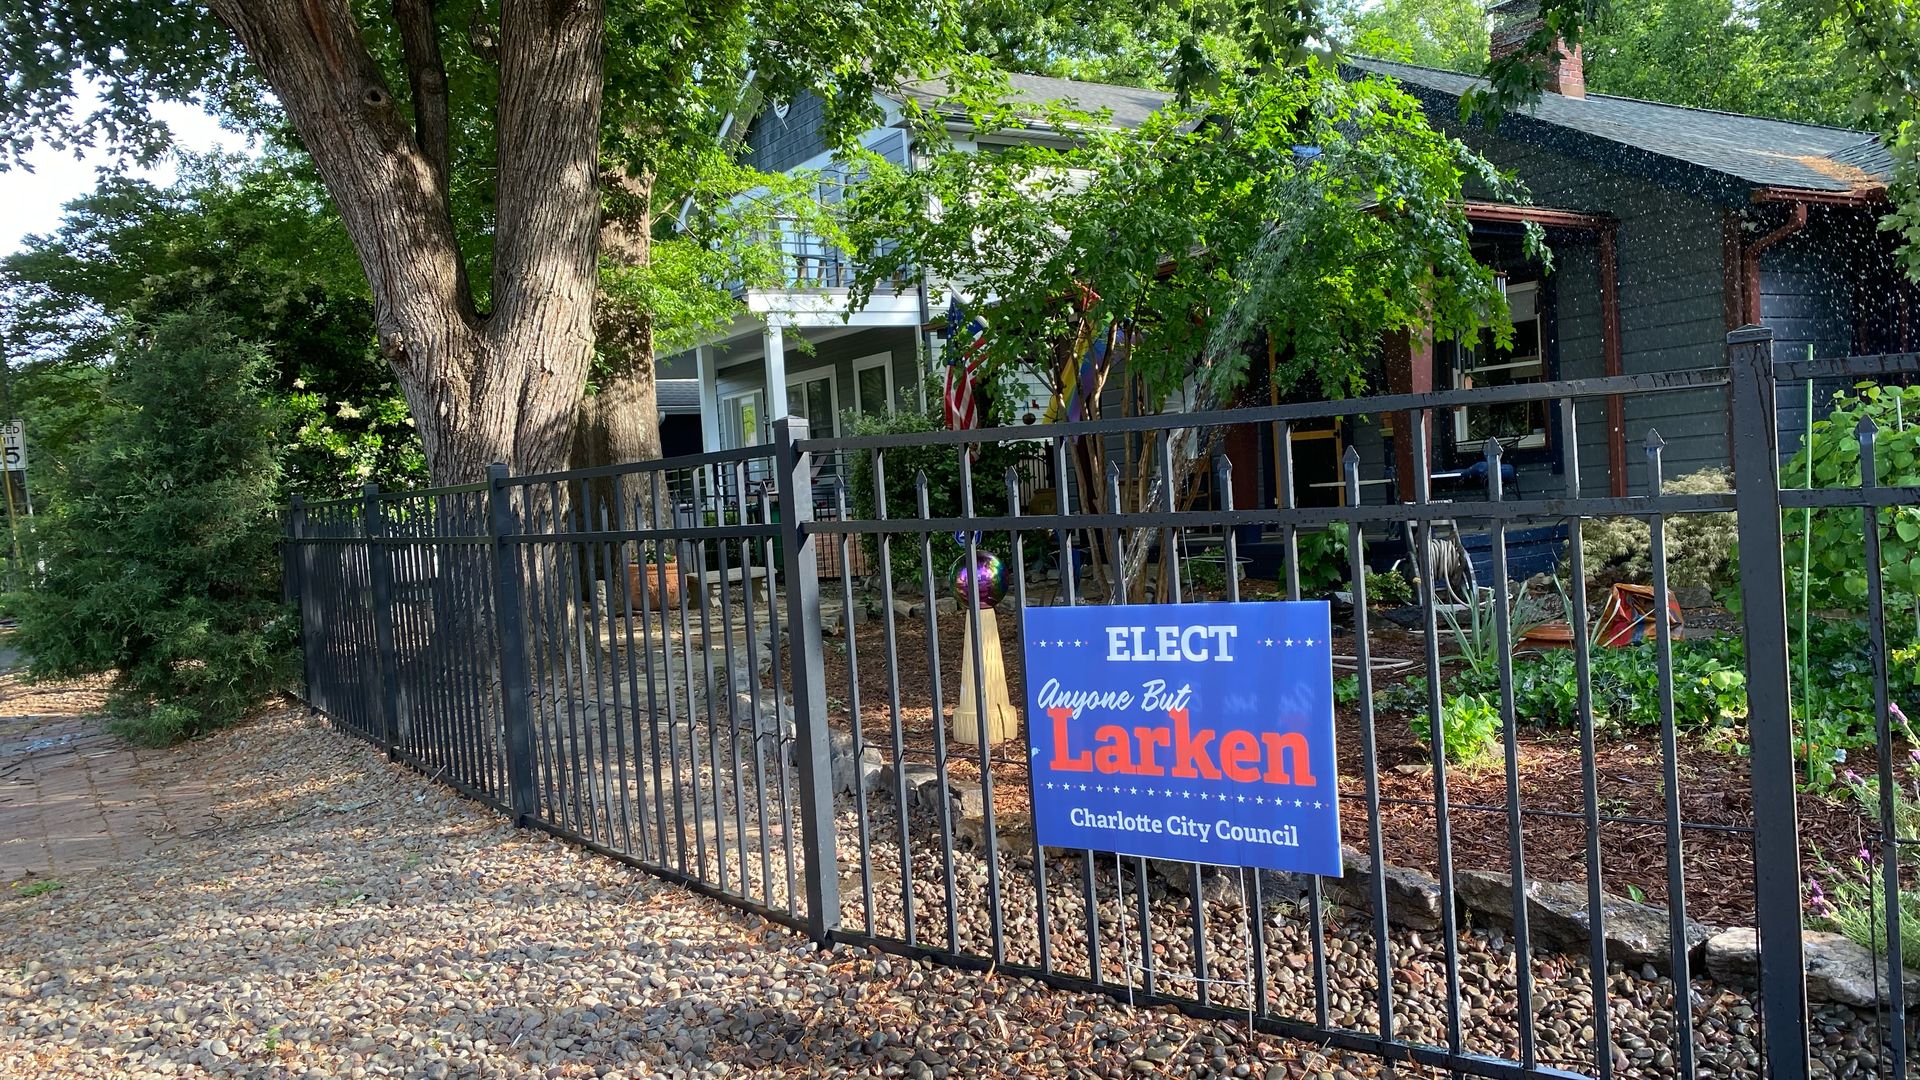 Sign in front of a house that says "elect anyone but Larken"